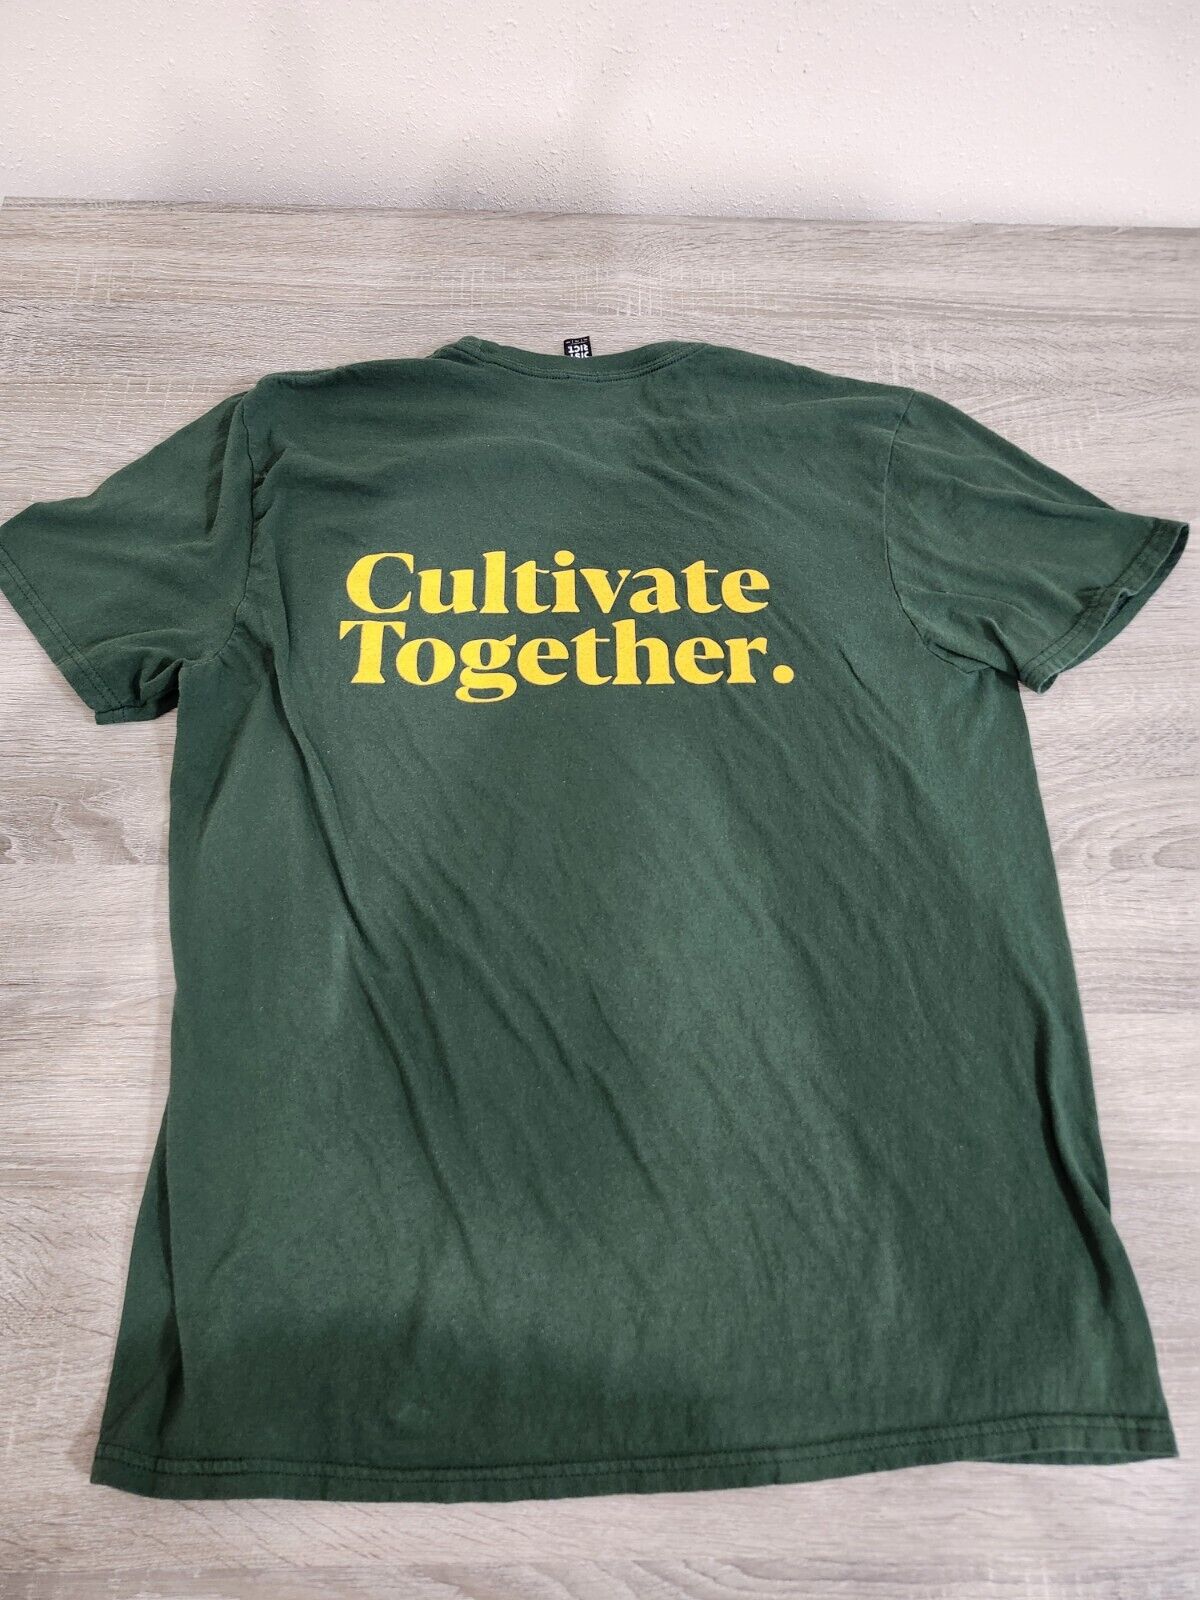 TRULIEVE T shirt XL Medical Marijuana Extra LARGE CULTIVATE TOGETHER GREEN Tee